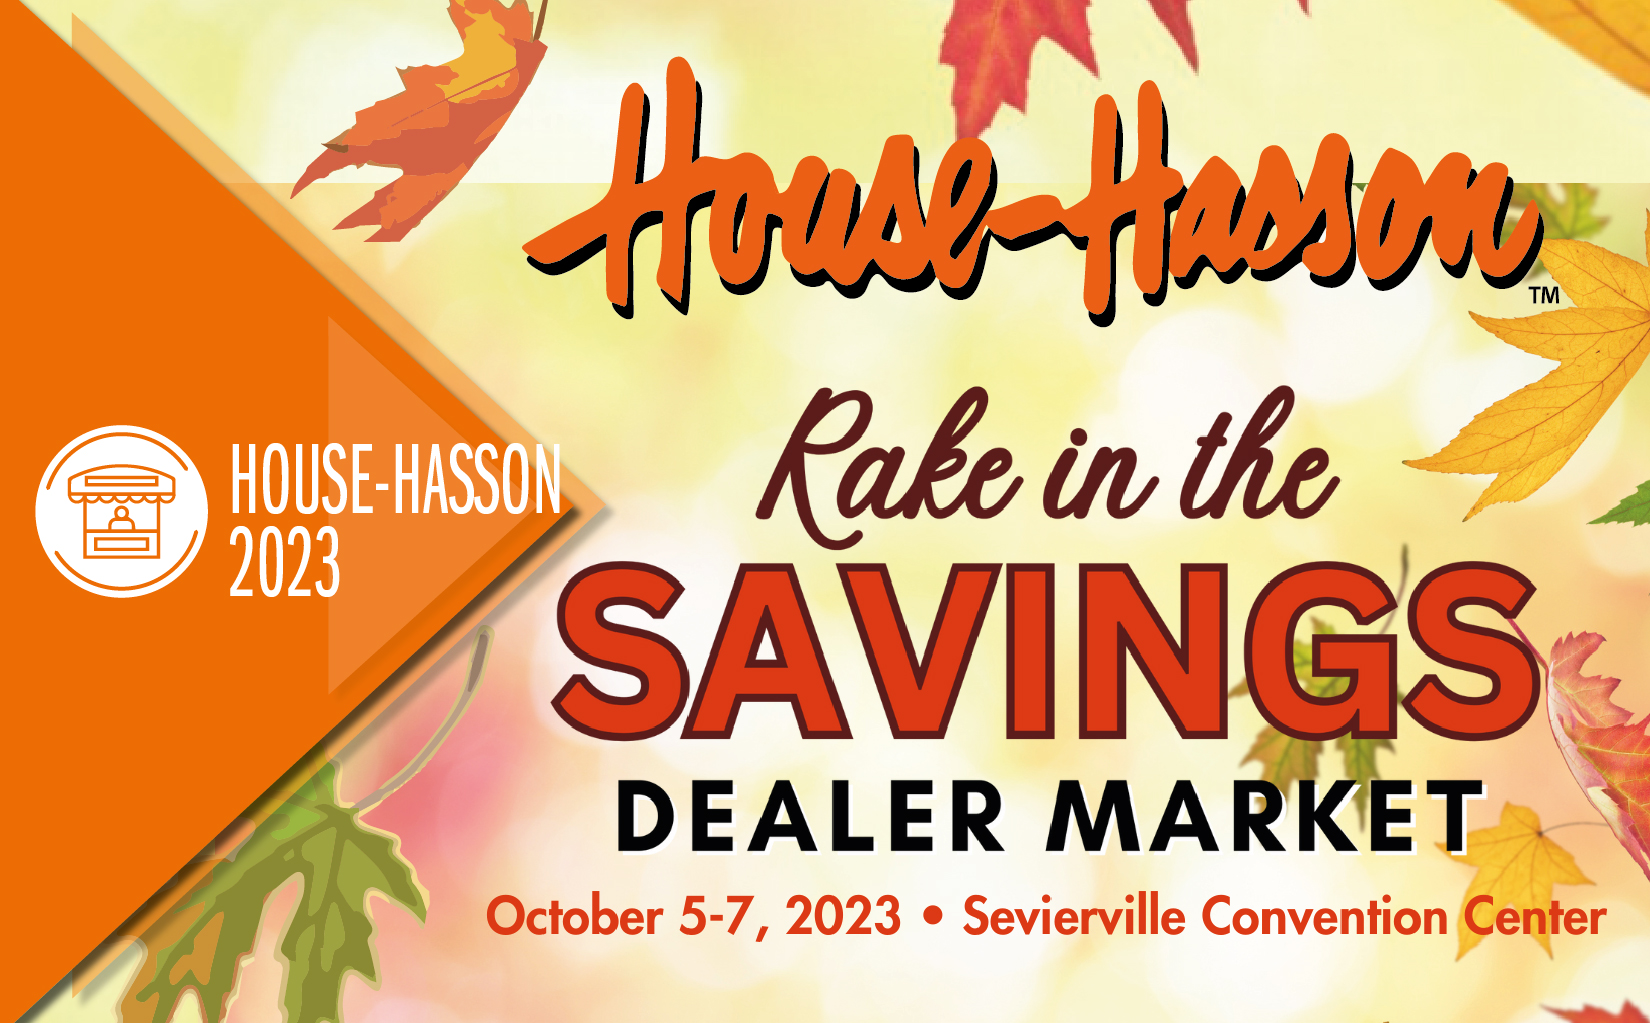 Meet us at House-Hasson Dealer Market October 6th-7th